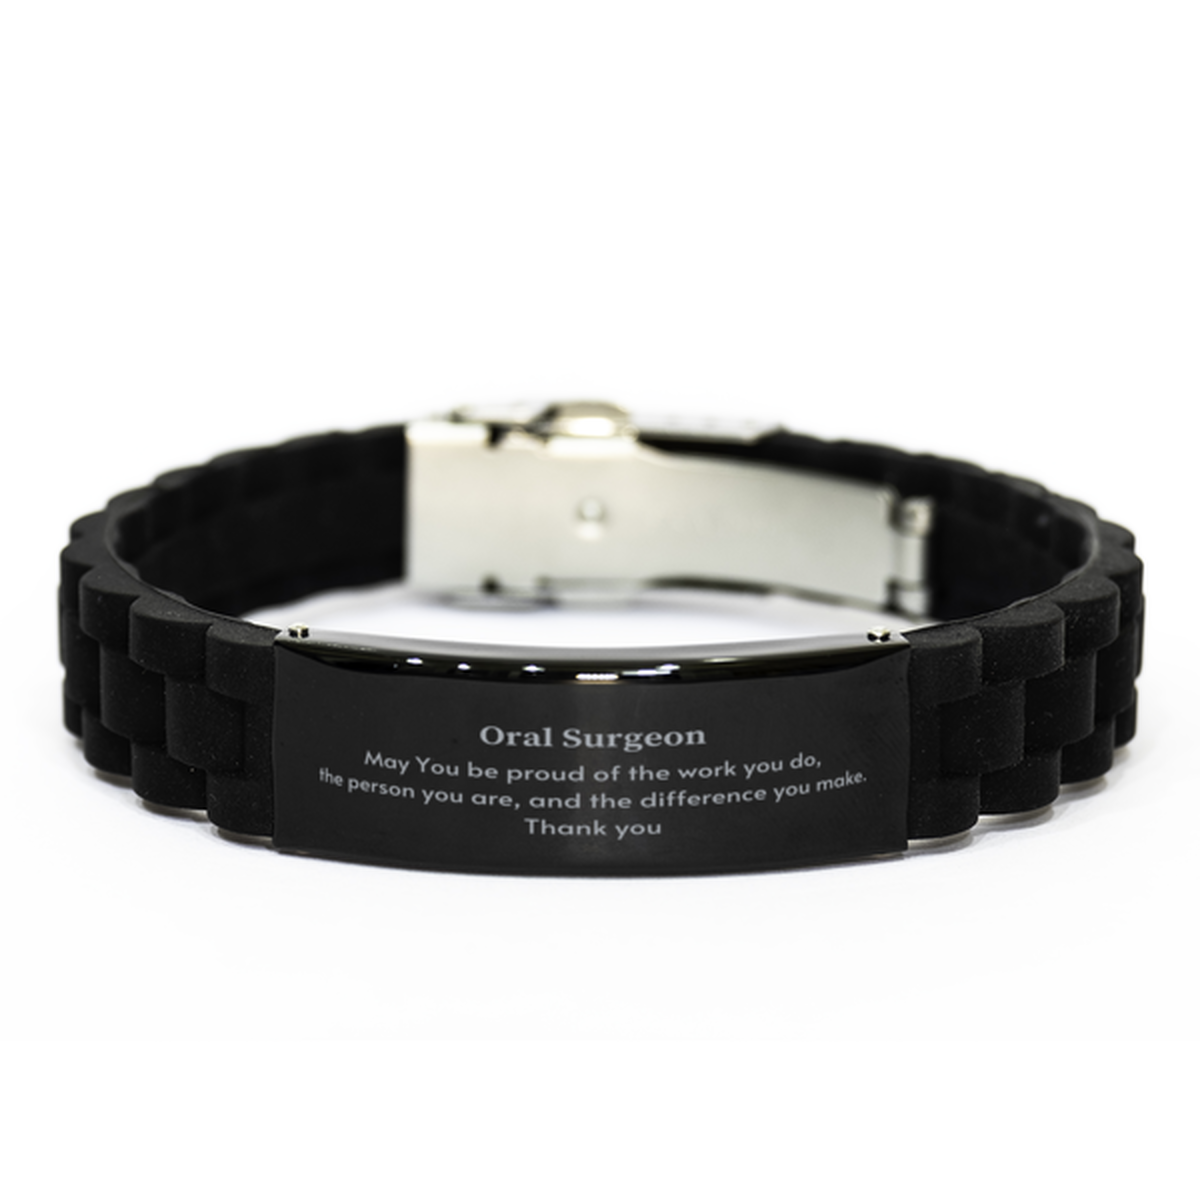 Heartwarming Black Glidelock Clasp Bracelet Retirement Coworkers Gifts for Oral Surgeon, Oral Surgeon May You be proud of the work you do, the person you are Gifts for Boss Men Women Friends